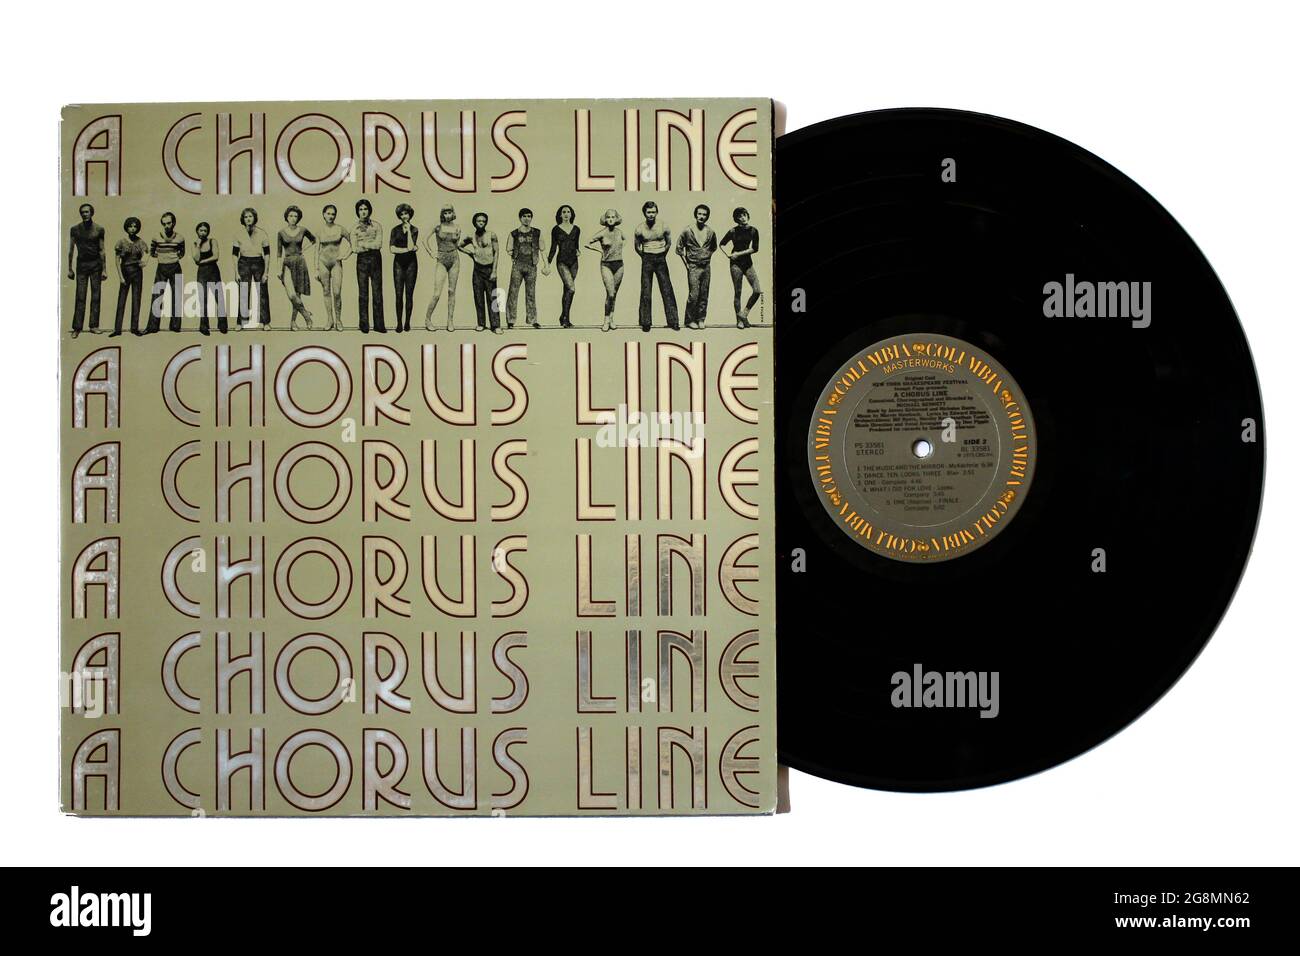 Broadway Musical for the 1985 film adaptation of A Chorus Line music album on vinyl record LP disc. Album cover Stock Photo